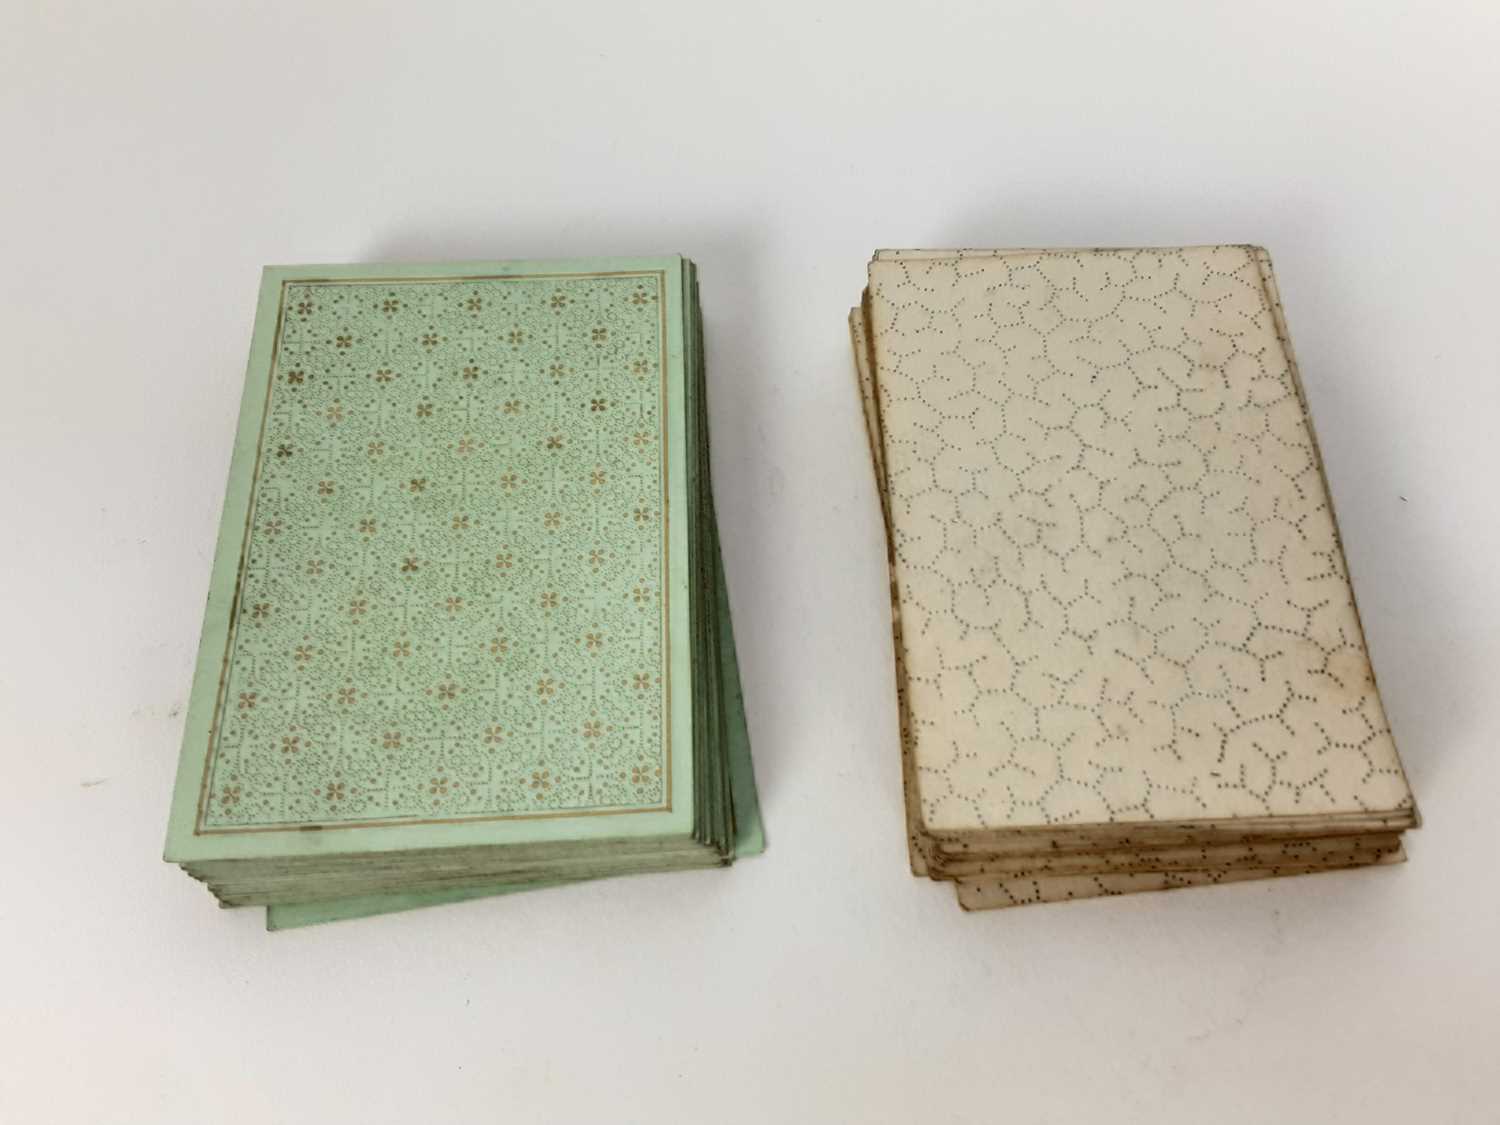 Two sets of 19th century playing cards, including a set without suits for a fancy game, published by - Image 4 of 4